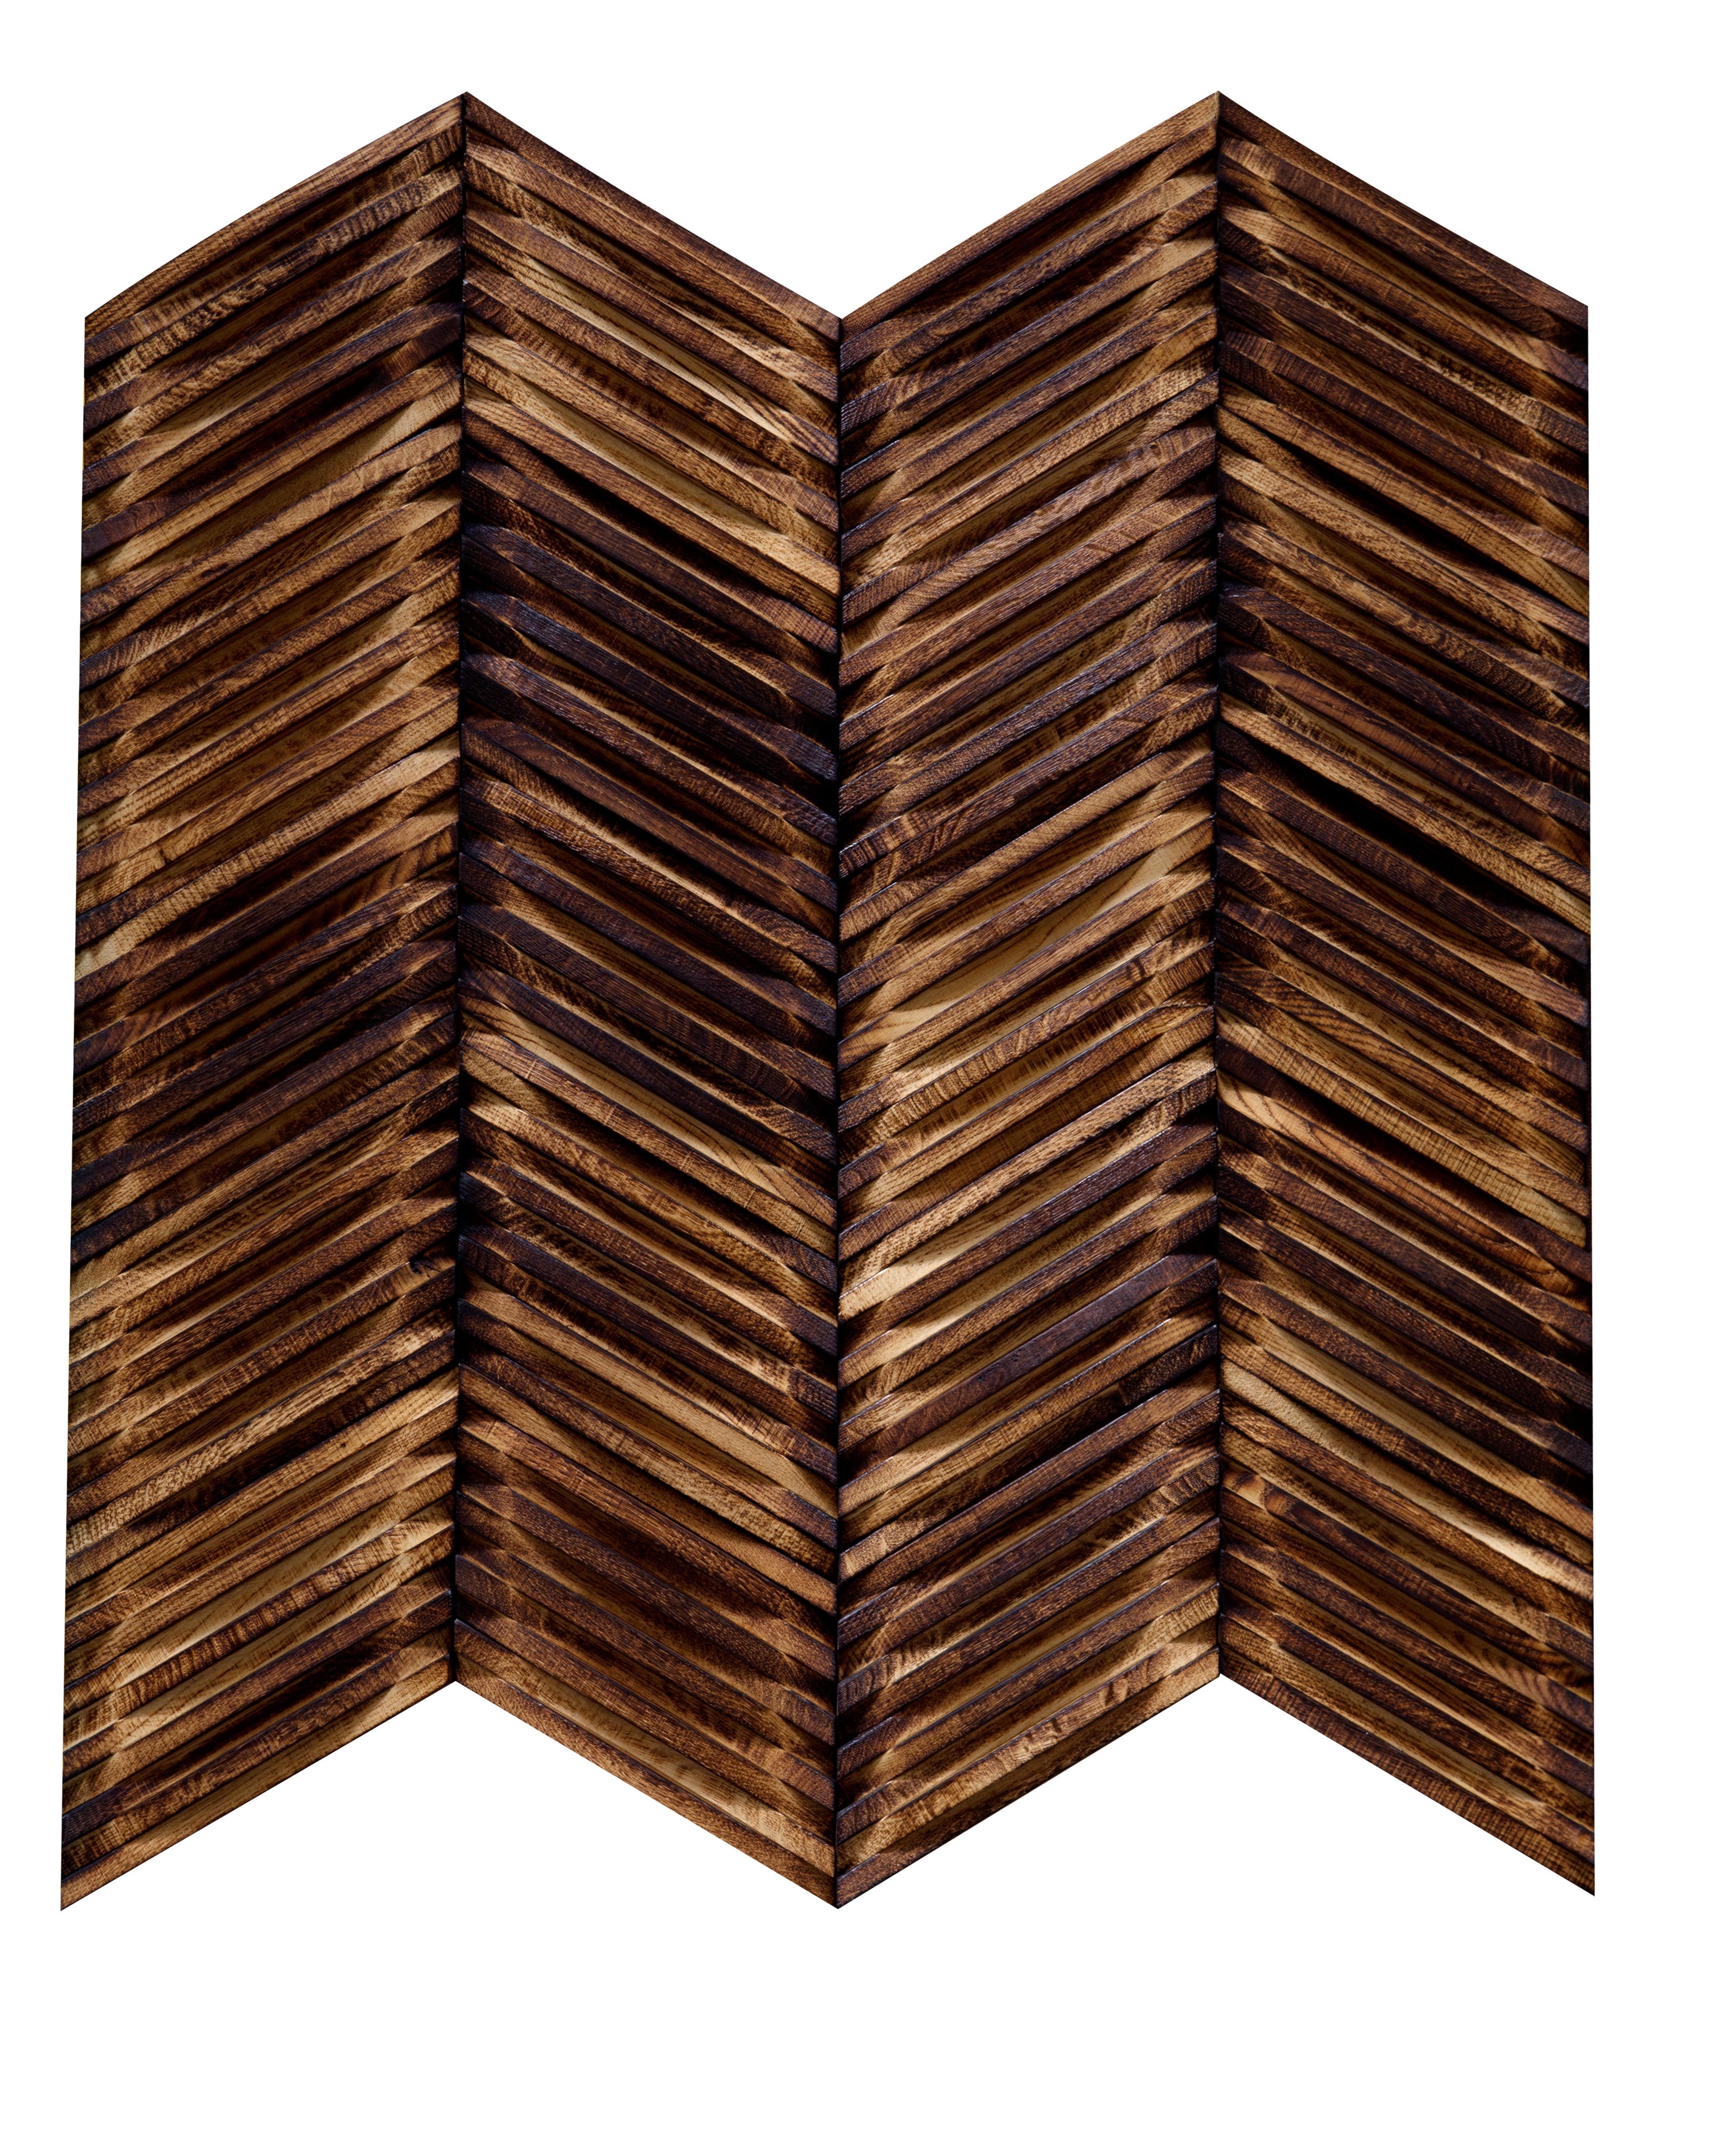 duchateau inceptiv curva chevron tabak oak three dimensional wall natural wood panel hard wax oil for interior use distributed by surface group international